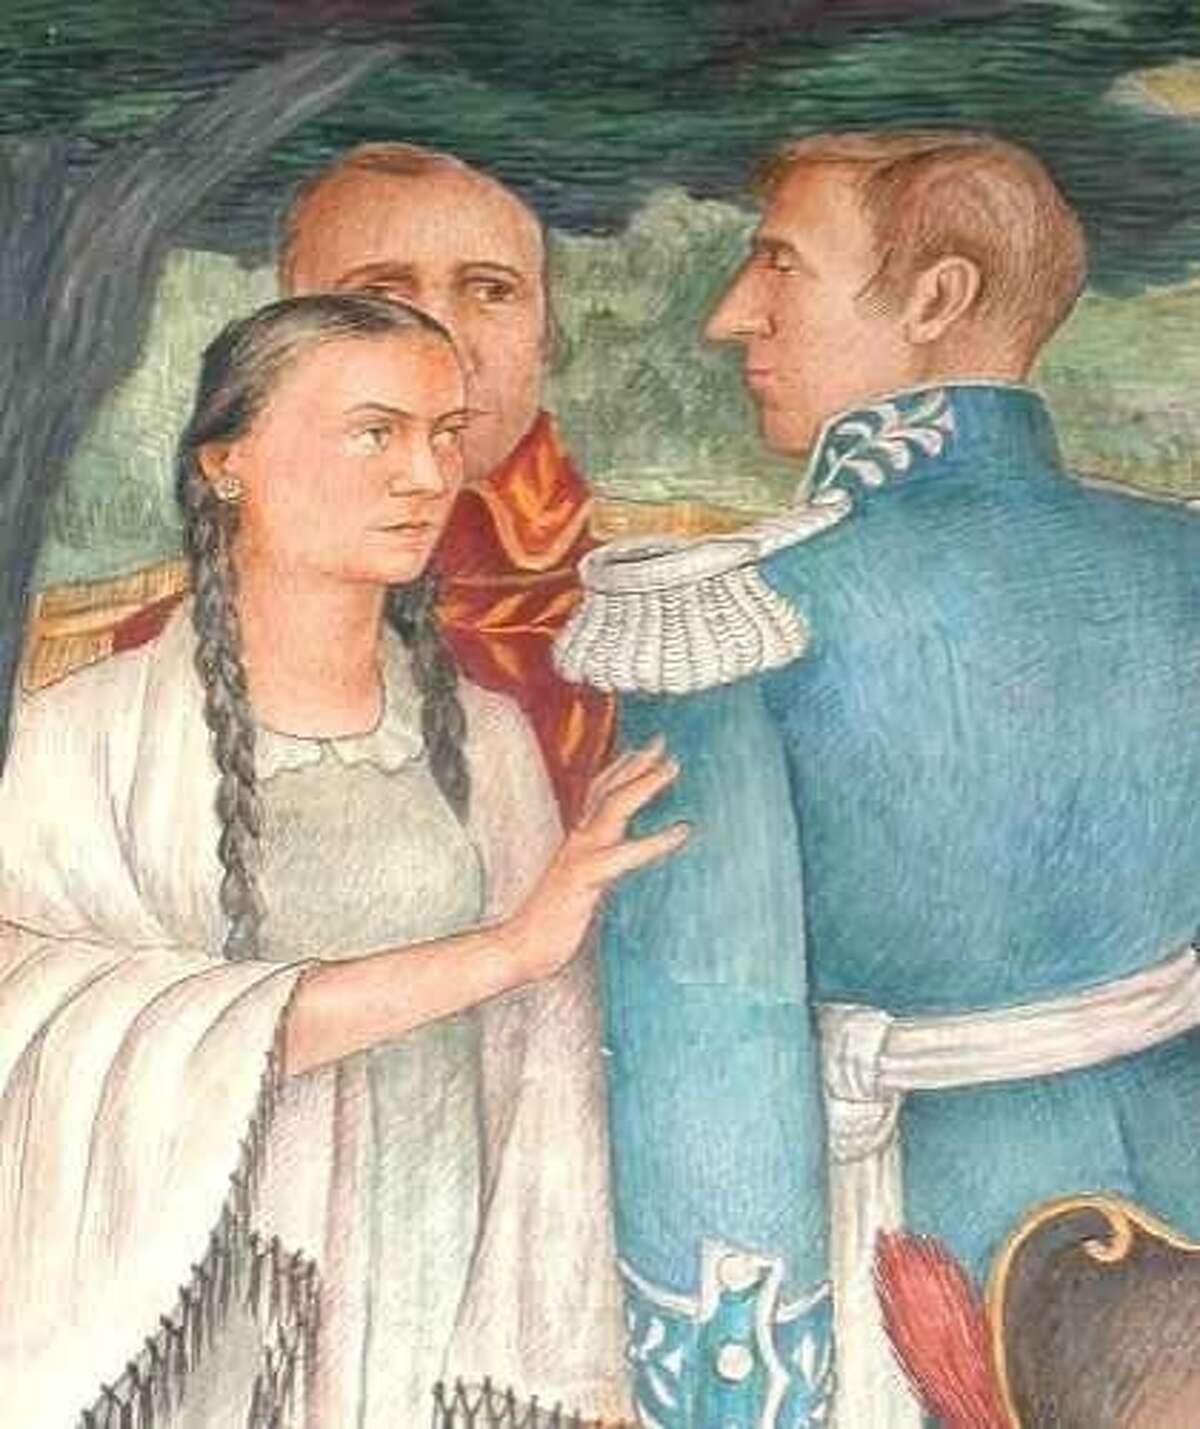 Concepcion Arguello and Nikolai Rezanov appear on a mural at the Post Interfaith Chapel. One of the most famous early love stories of the Bay Area actually transpired here at the Presidio of San Francisco in the late 18th century. Despite language barriers and contrasting cultural backgrounds, a young Spanish girl and a Russian explorer fell in love and spawned a legend that continues today. Ran on: 02-18-2006 Concepcion Arguello and Nikolai Rezanov appear on a mural at the Post Interfaith Chapel at the Presidio of San Francisco.Ran on: 02-18-2006 Concepcion Arguello and Nikolai Rezanov appear on a mural at the Post Interfaith Chapel at the Presidio of San Francisco.